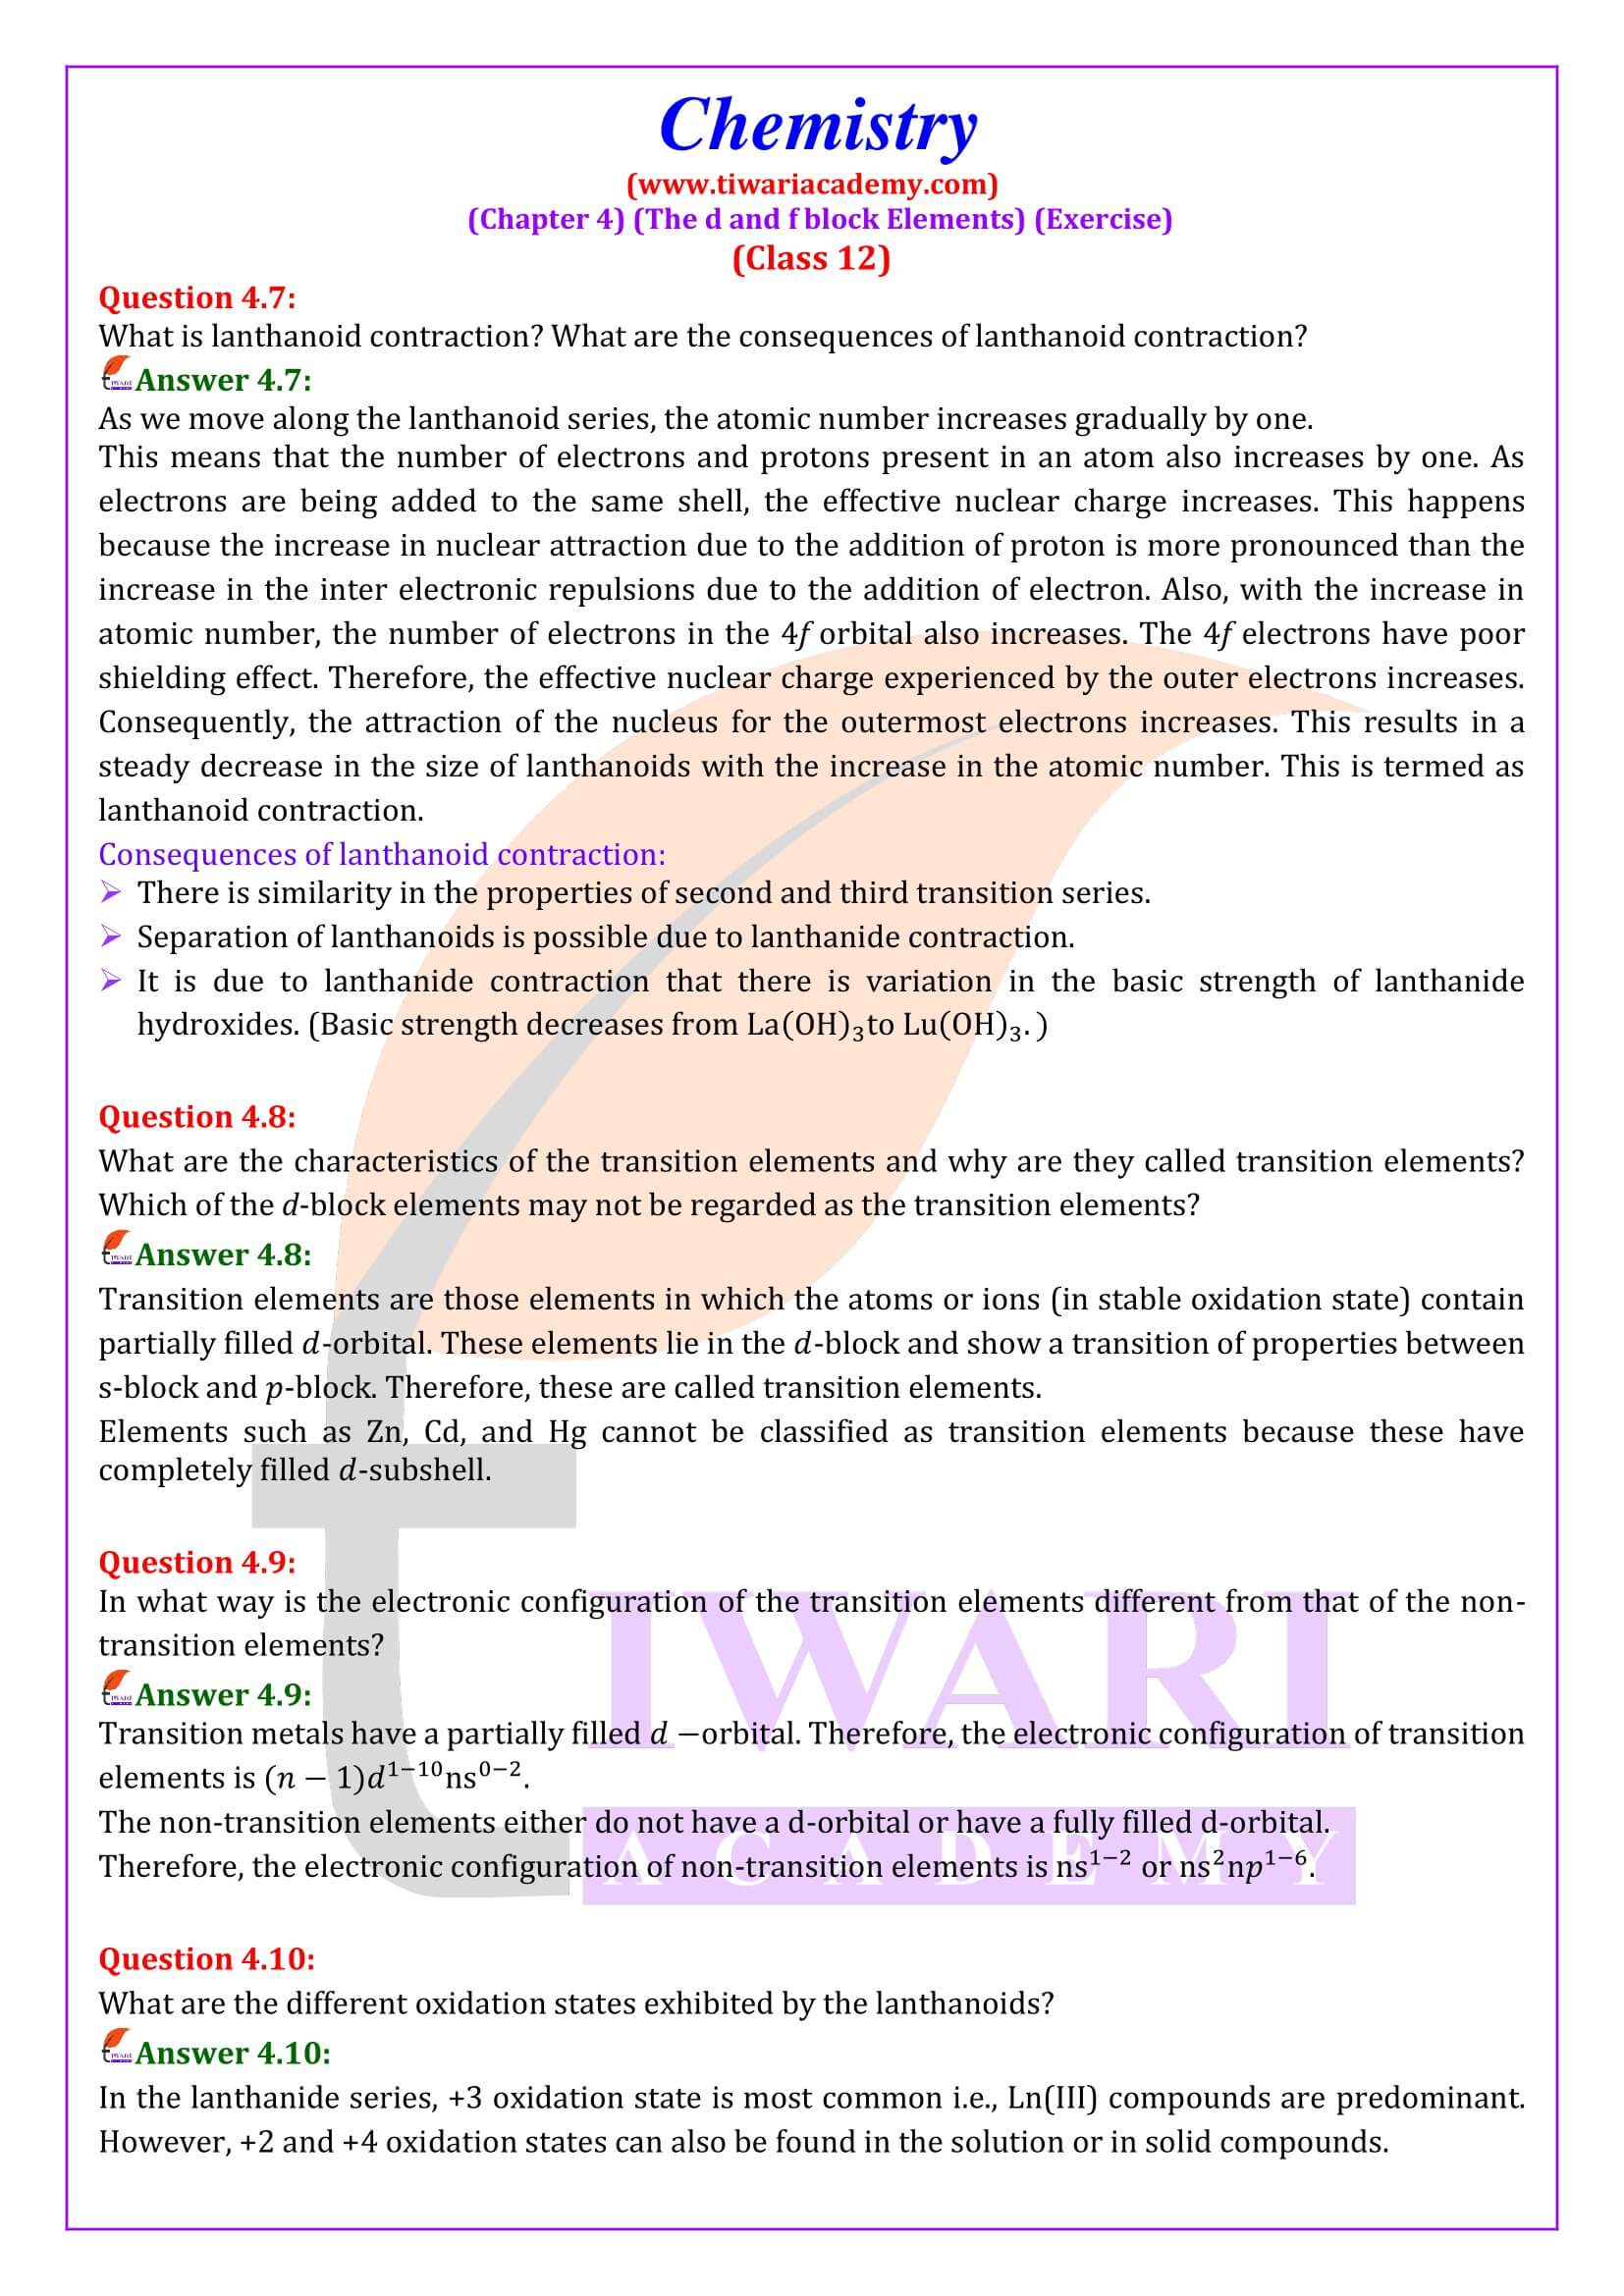 NCERT Solutions for Class 12 Chemistry Chapter 4